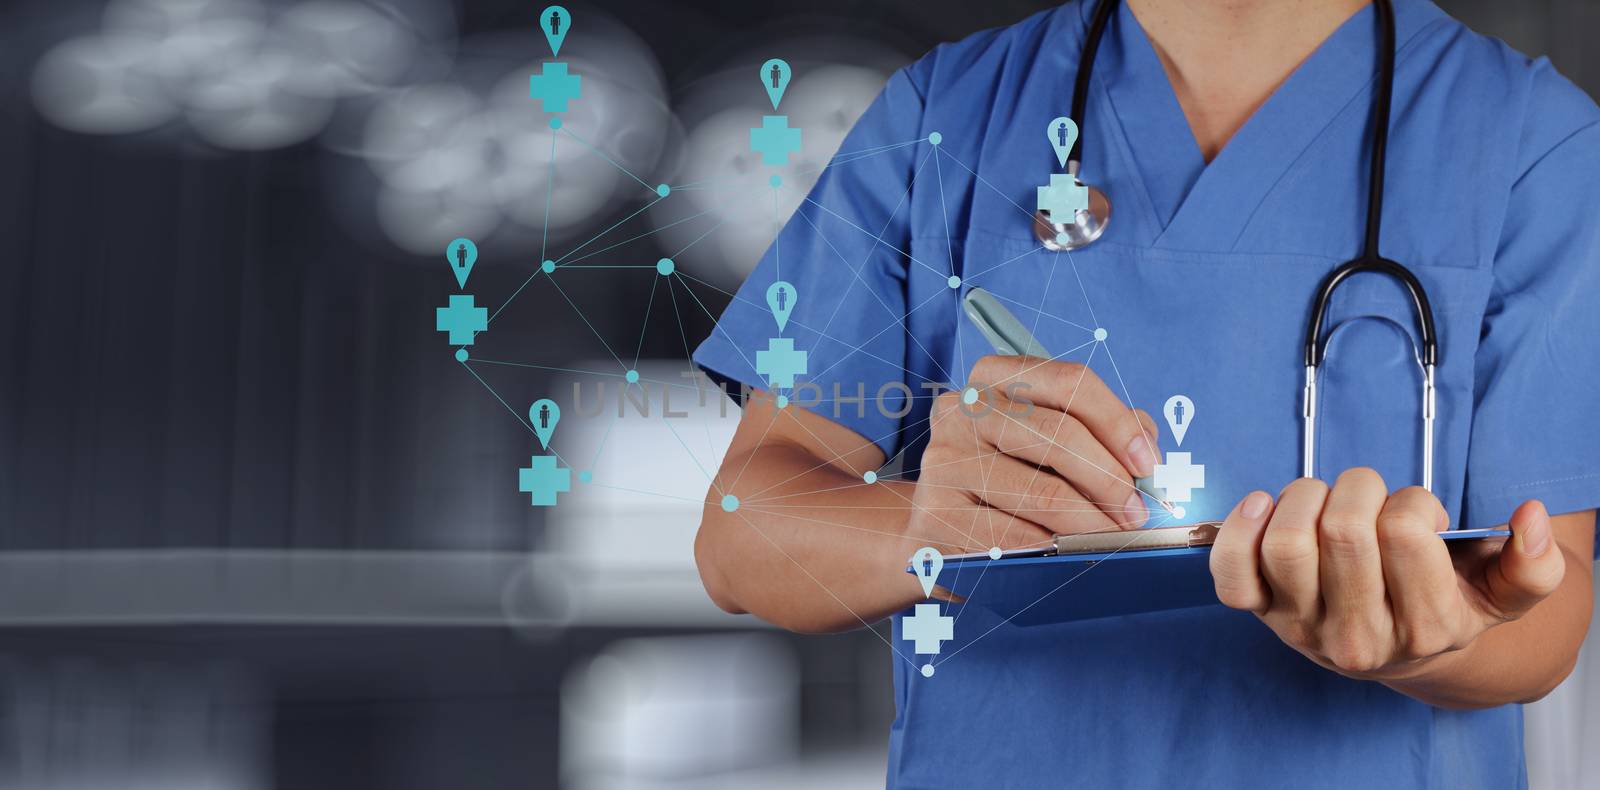 Medical Doctor working  with note board as medical network concept